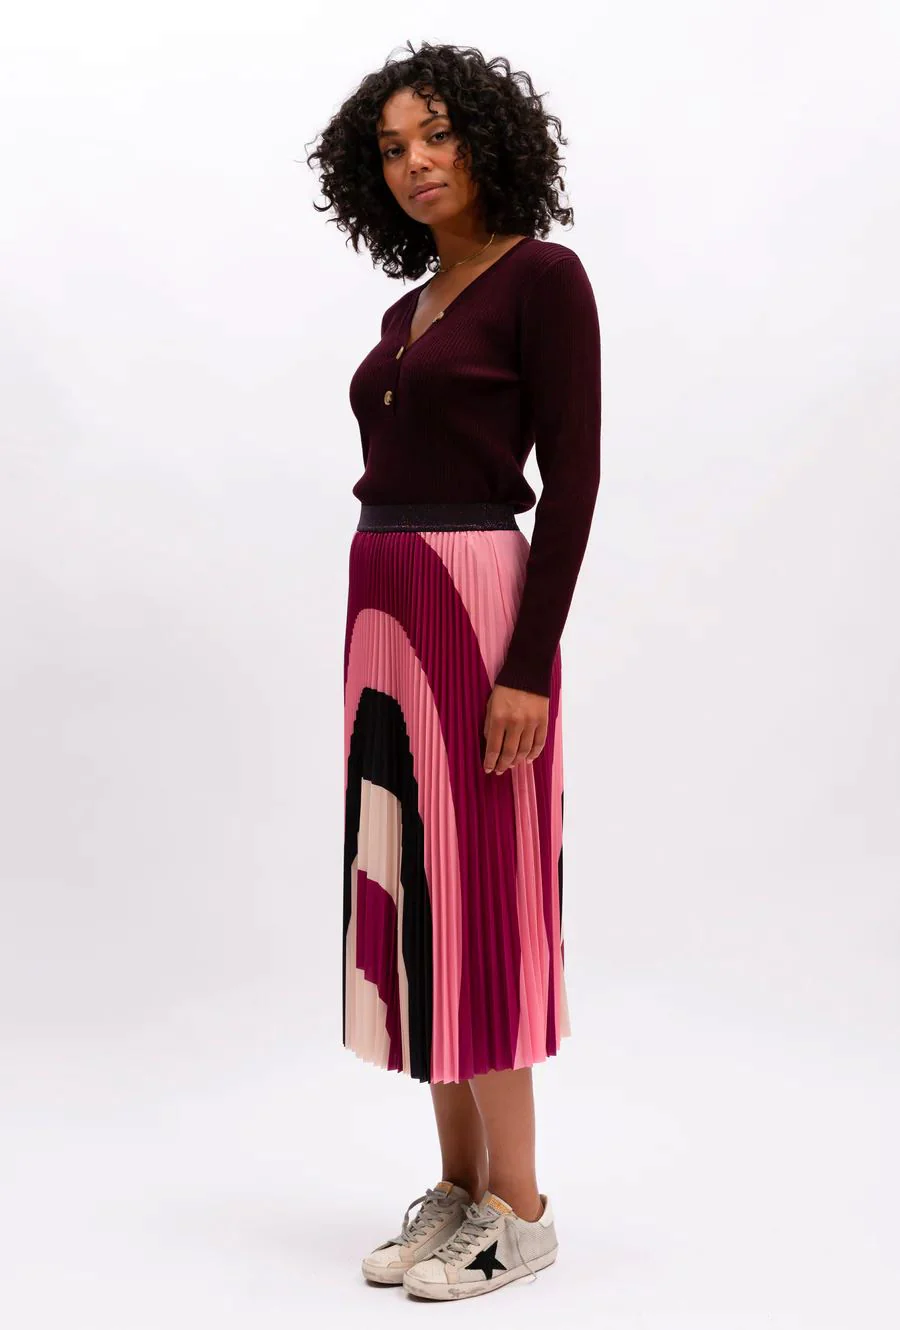 The Lilian Pleat Skirt by We Are The Others is now available in a lively and wavy sangria pattern, featuring pinks, black, and cream. Tailored from a soft and comfortable fabric, this skirt is perfect for any occasion. lemon cyprus boutique